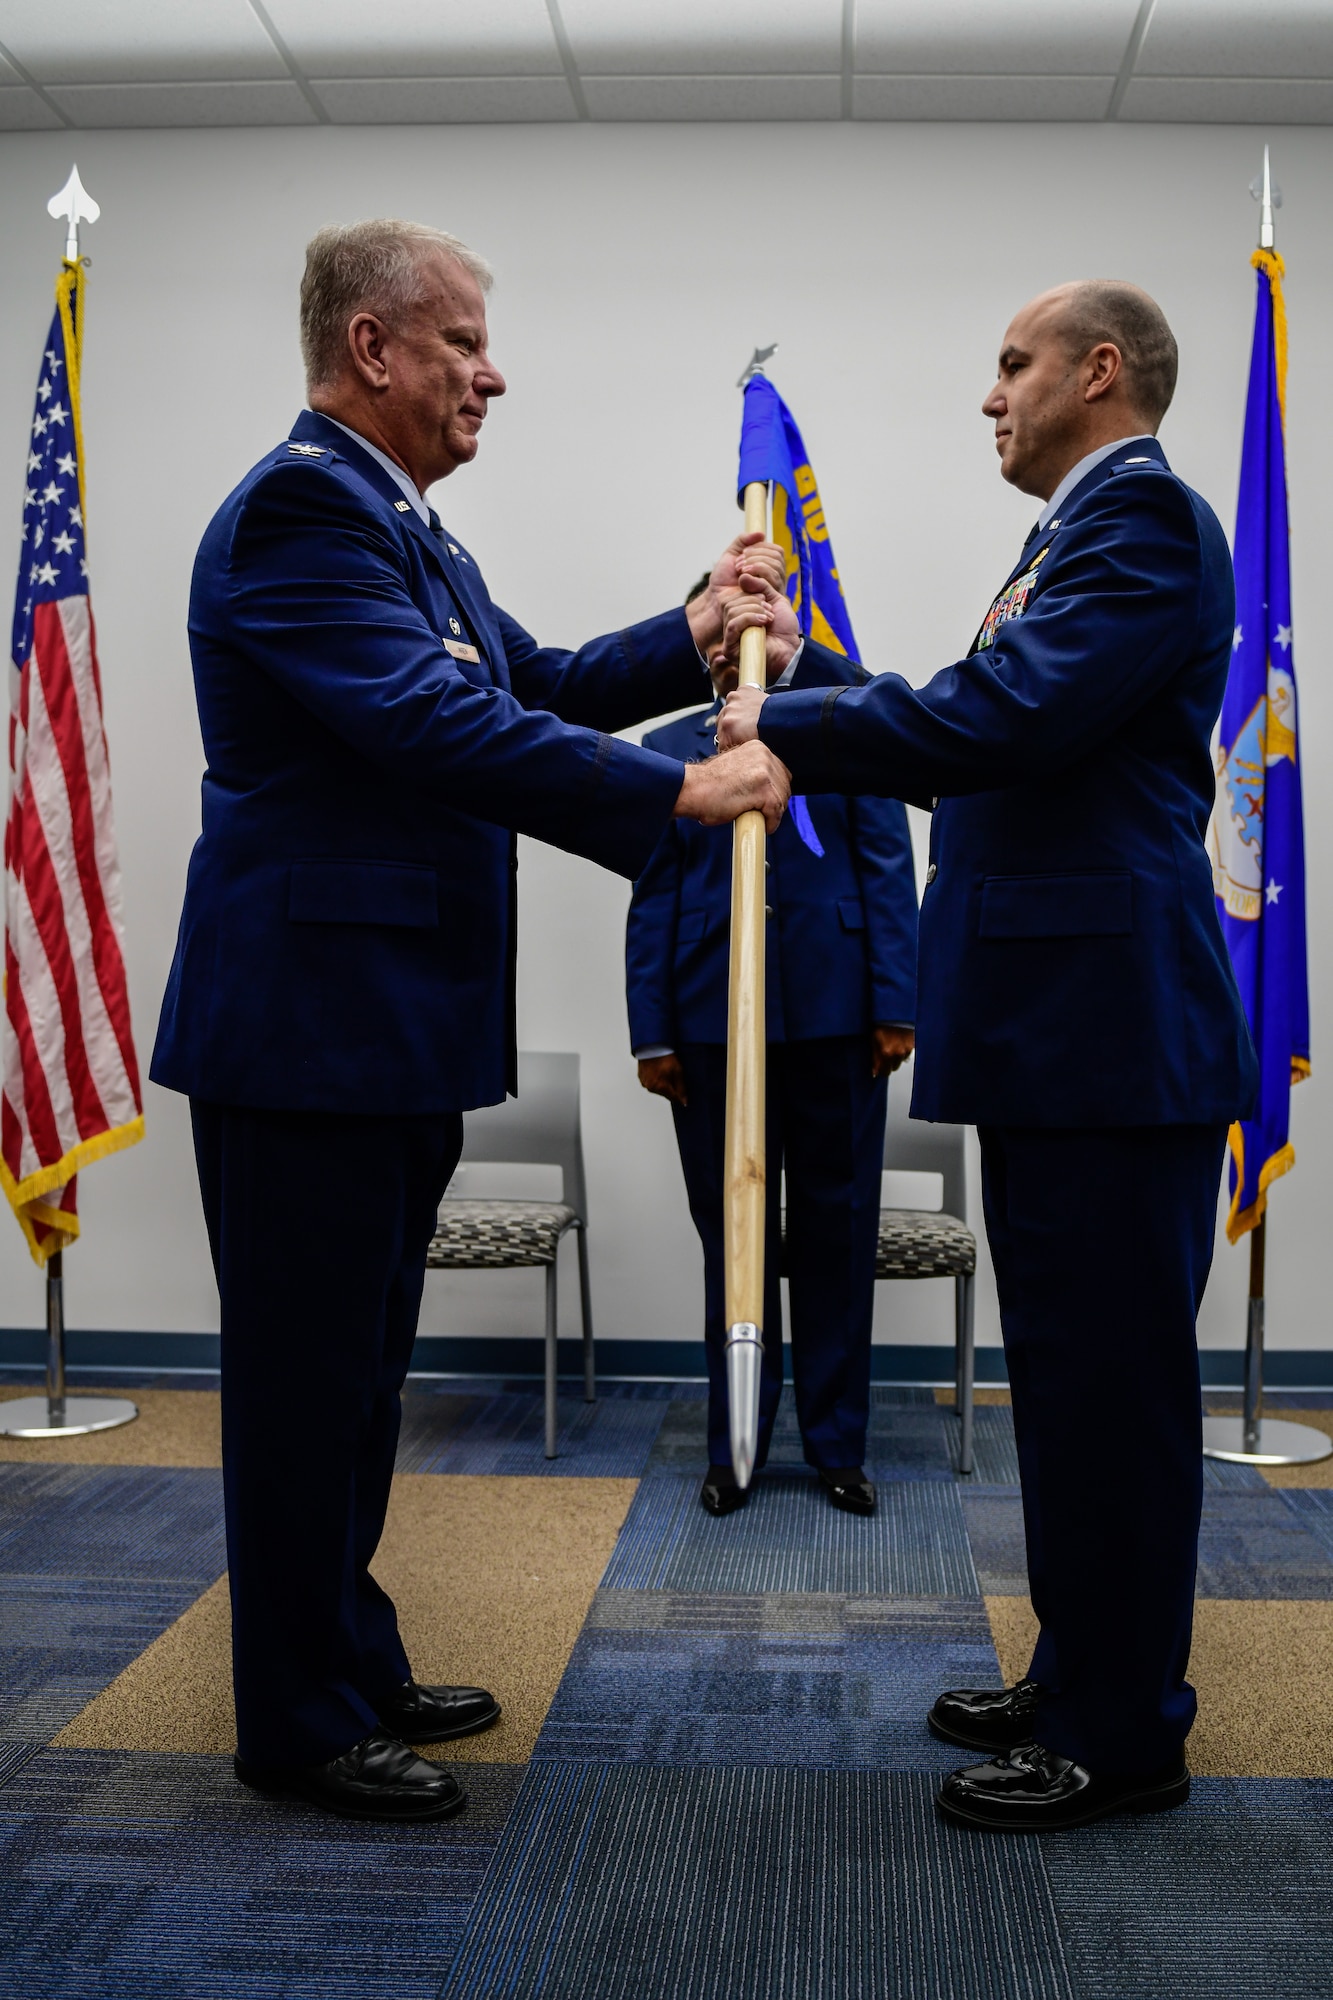 Lt. Col. Phillip Baker, the new 910th Civil Engineer Squadron commander, receives the 910th CES guidon from Col. Don Wren, commander of the 910th Mission Support Group, during a change of command ceremony, May 4, 2019, here.